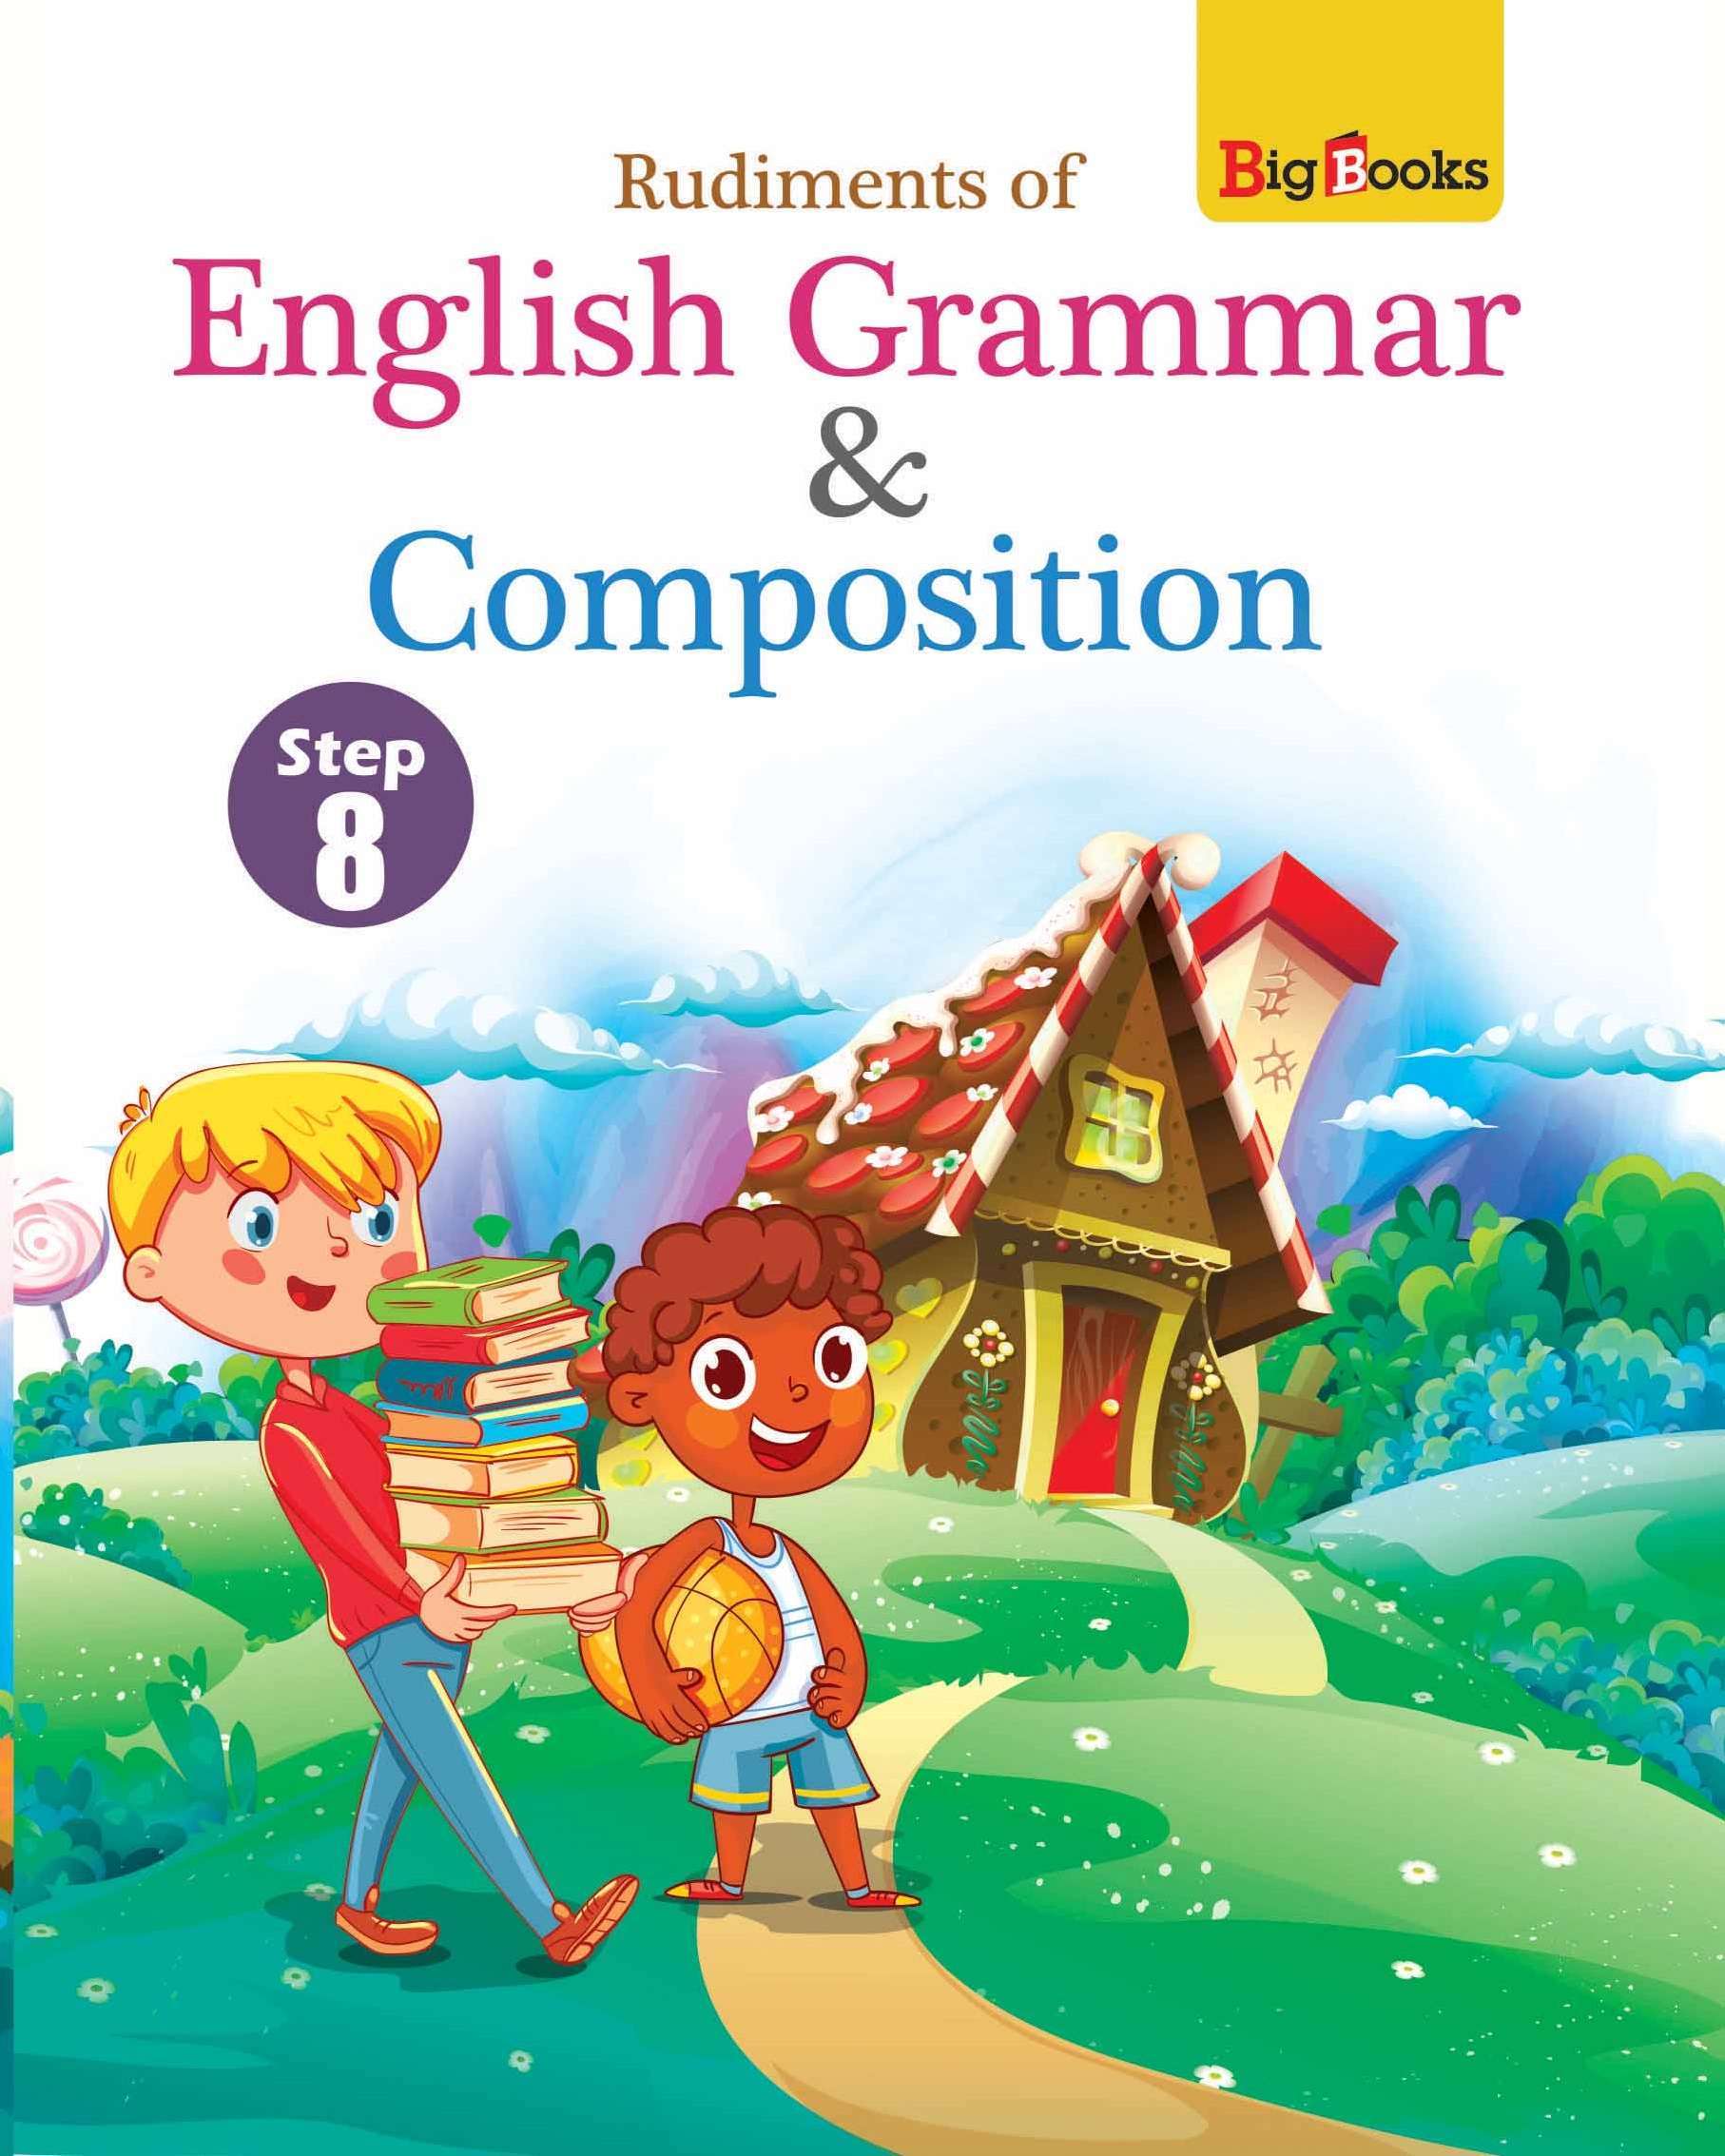 Buy English grammer book for 8 online